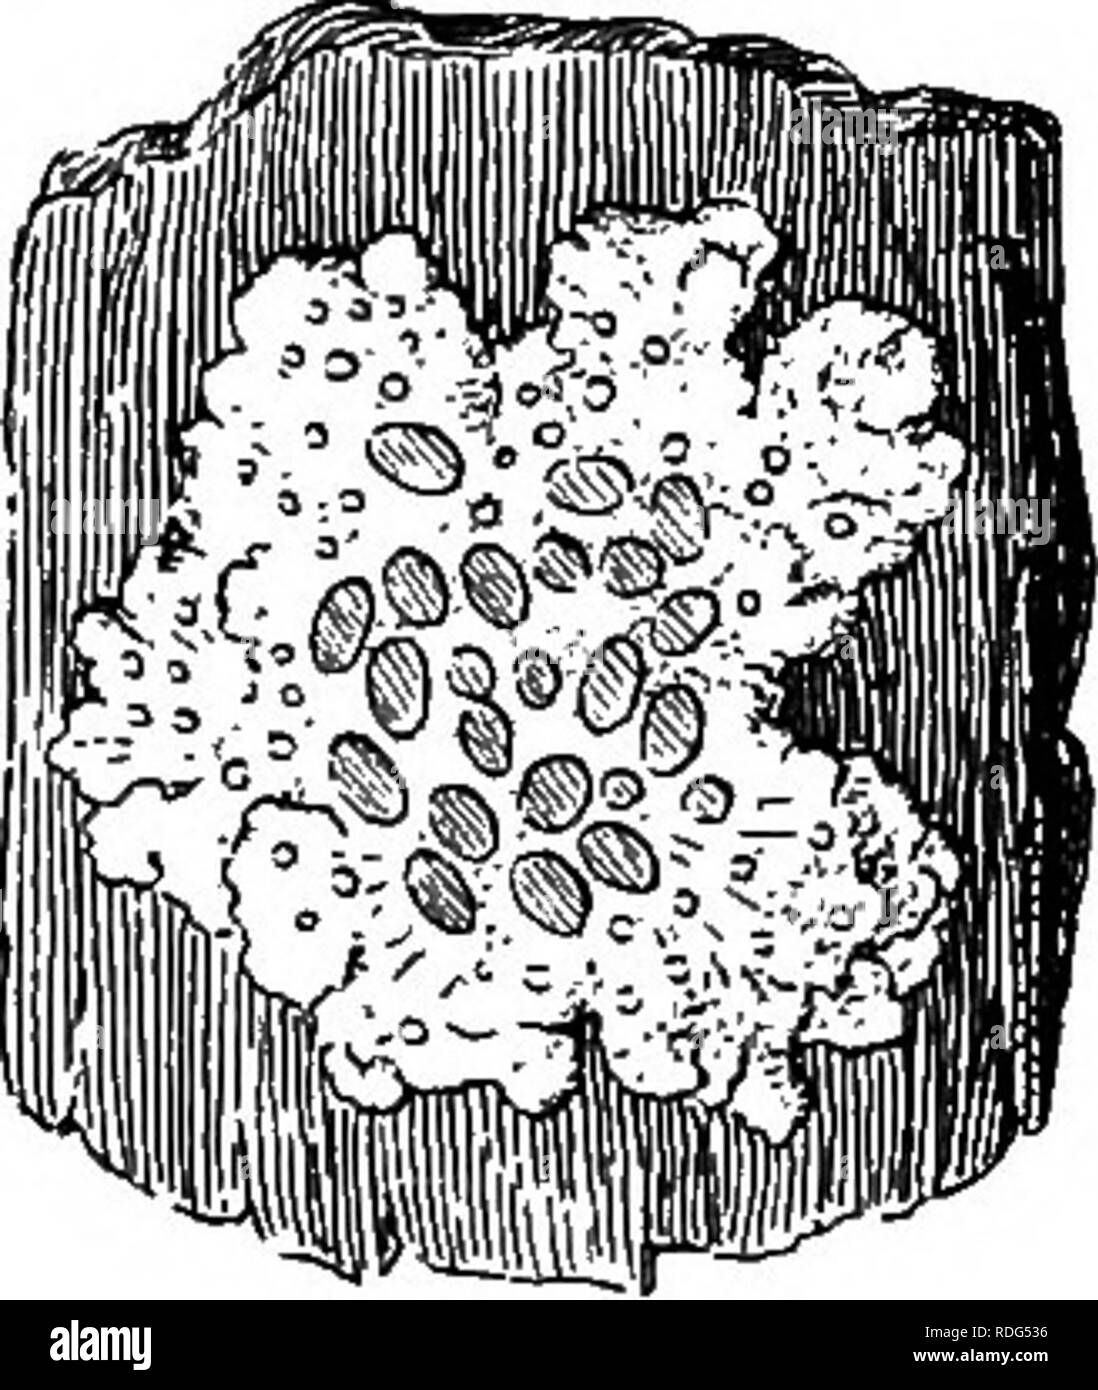 . Essentials of botany. Botany; Botany. 254 ESSENTIALS OF BOTANY. Fig. 178. A Lichen (Xantkoria). (Natural size.) sufSciently distinct so that lichens are best considered by themselves for purposes of study and classification. The relation of the fungus and its algal host is not that of destructive parasitism, but rather a mutual rela- tion (symbiosis) in which both fungus and alga may have a vigorous growth. The relationship has been investi- gated in various ways, and it has been found that, while the alga may thrive independent of the fungus, the ger- minating fungus spores can grow only to Stock Photo